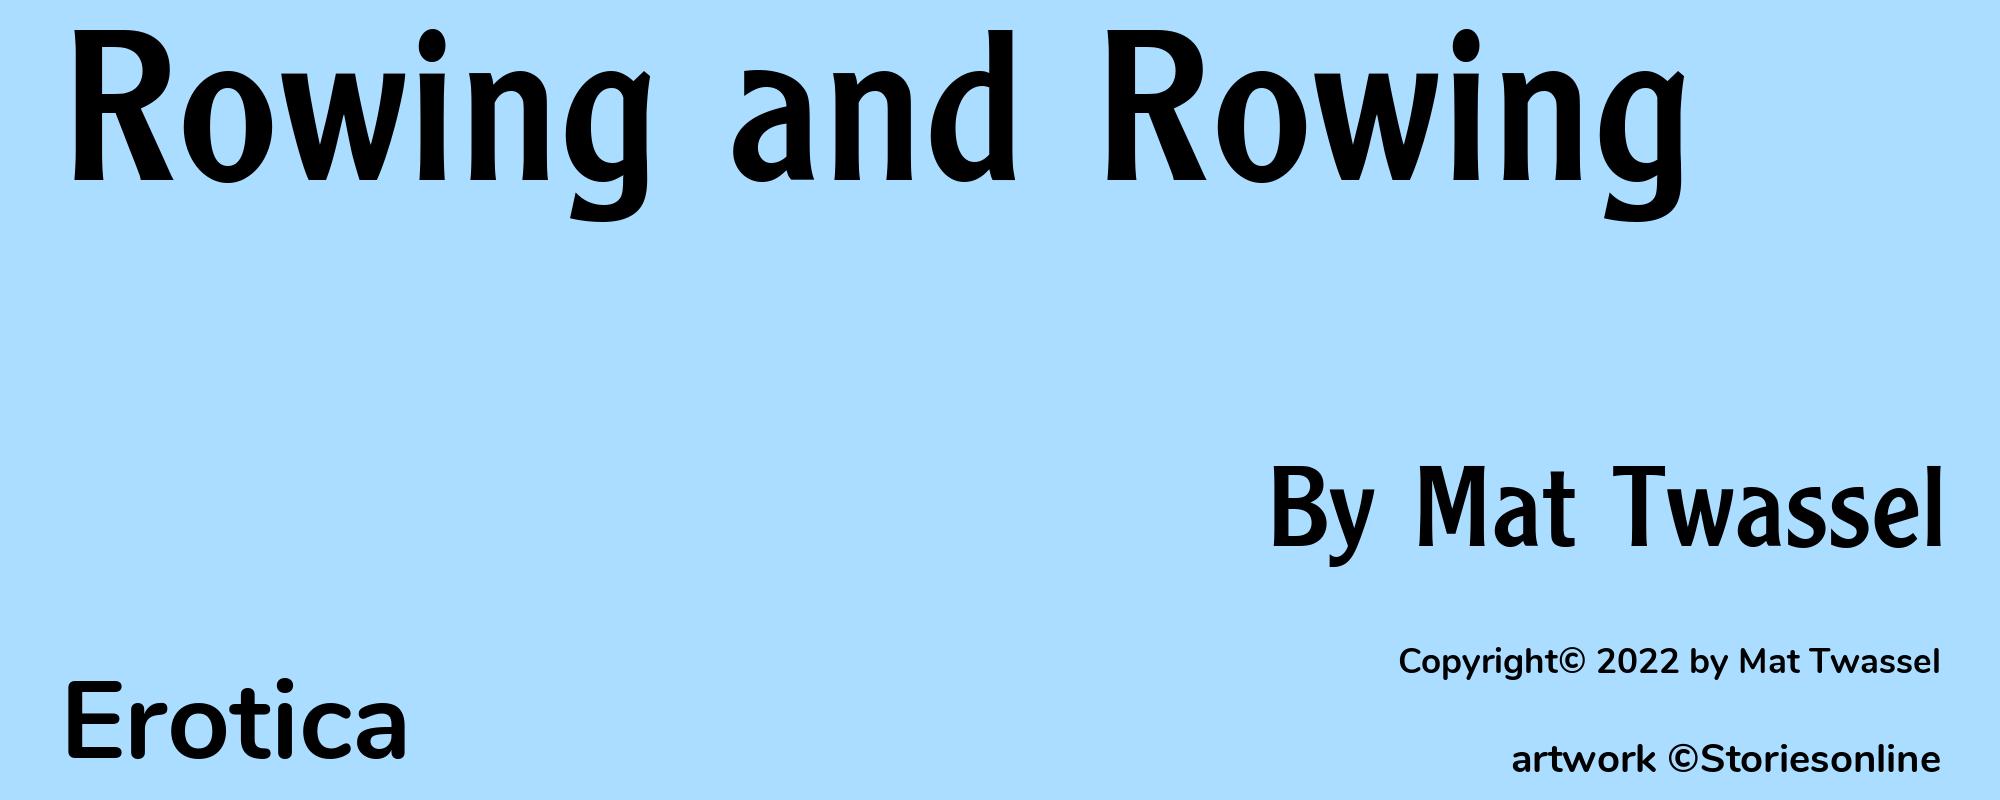 Rowing and Rowing - Cover